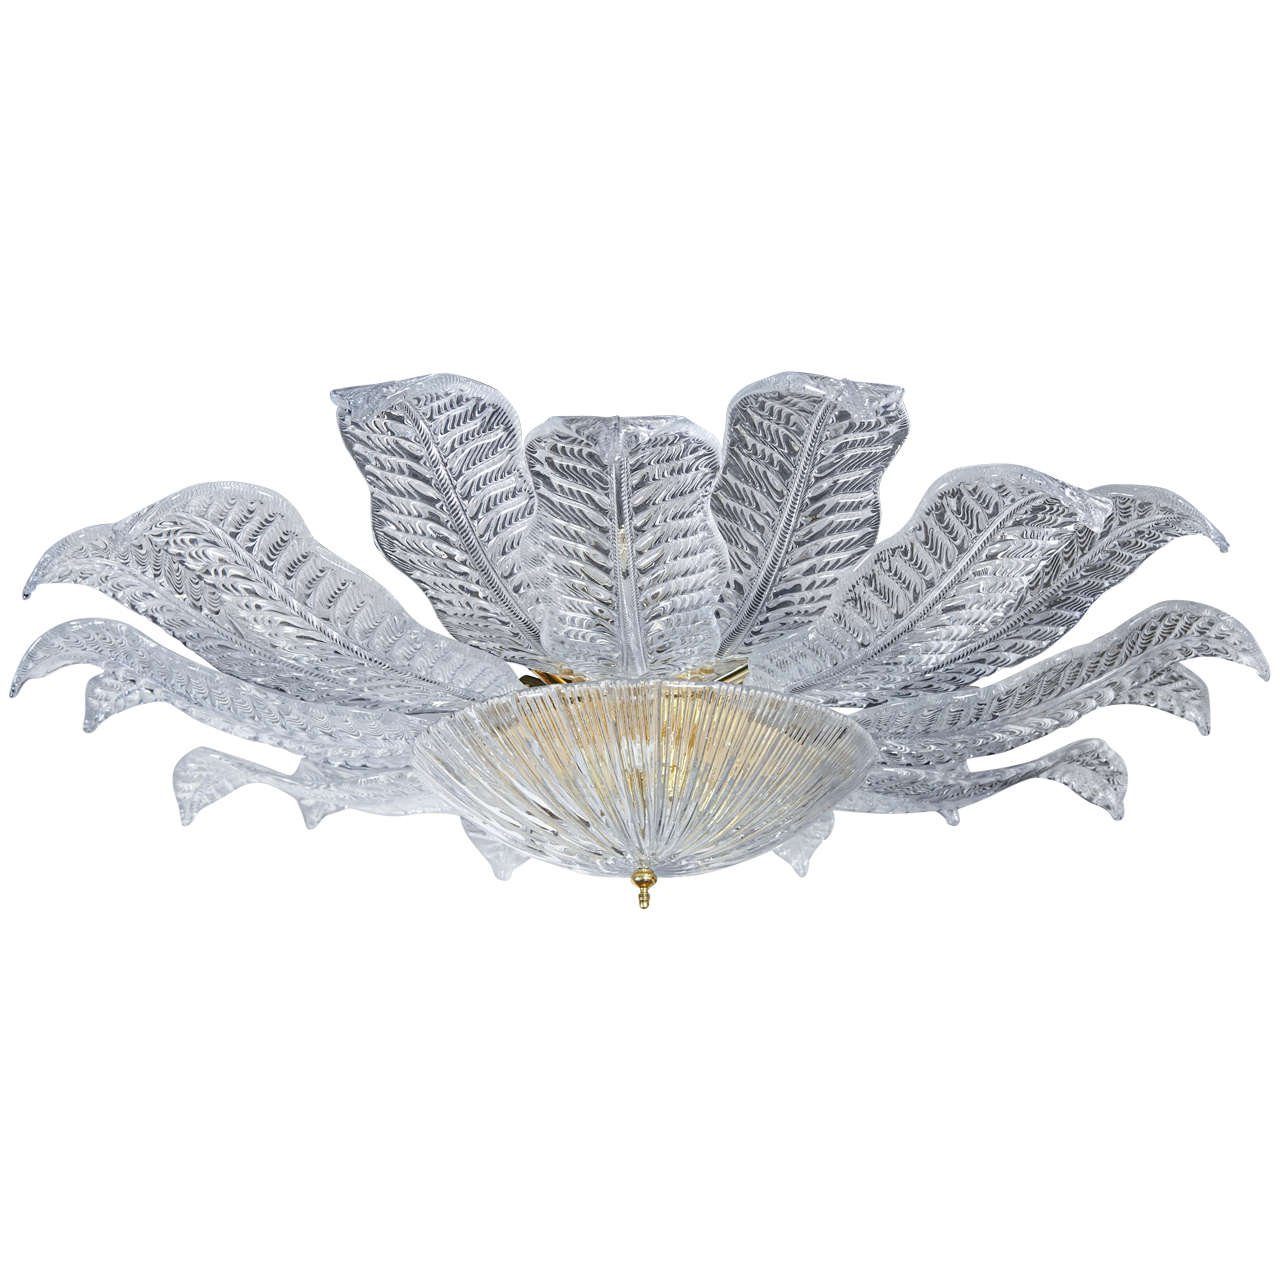 Murano Floral Ceiling Mount Fixture